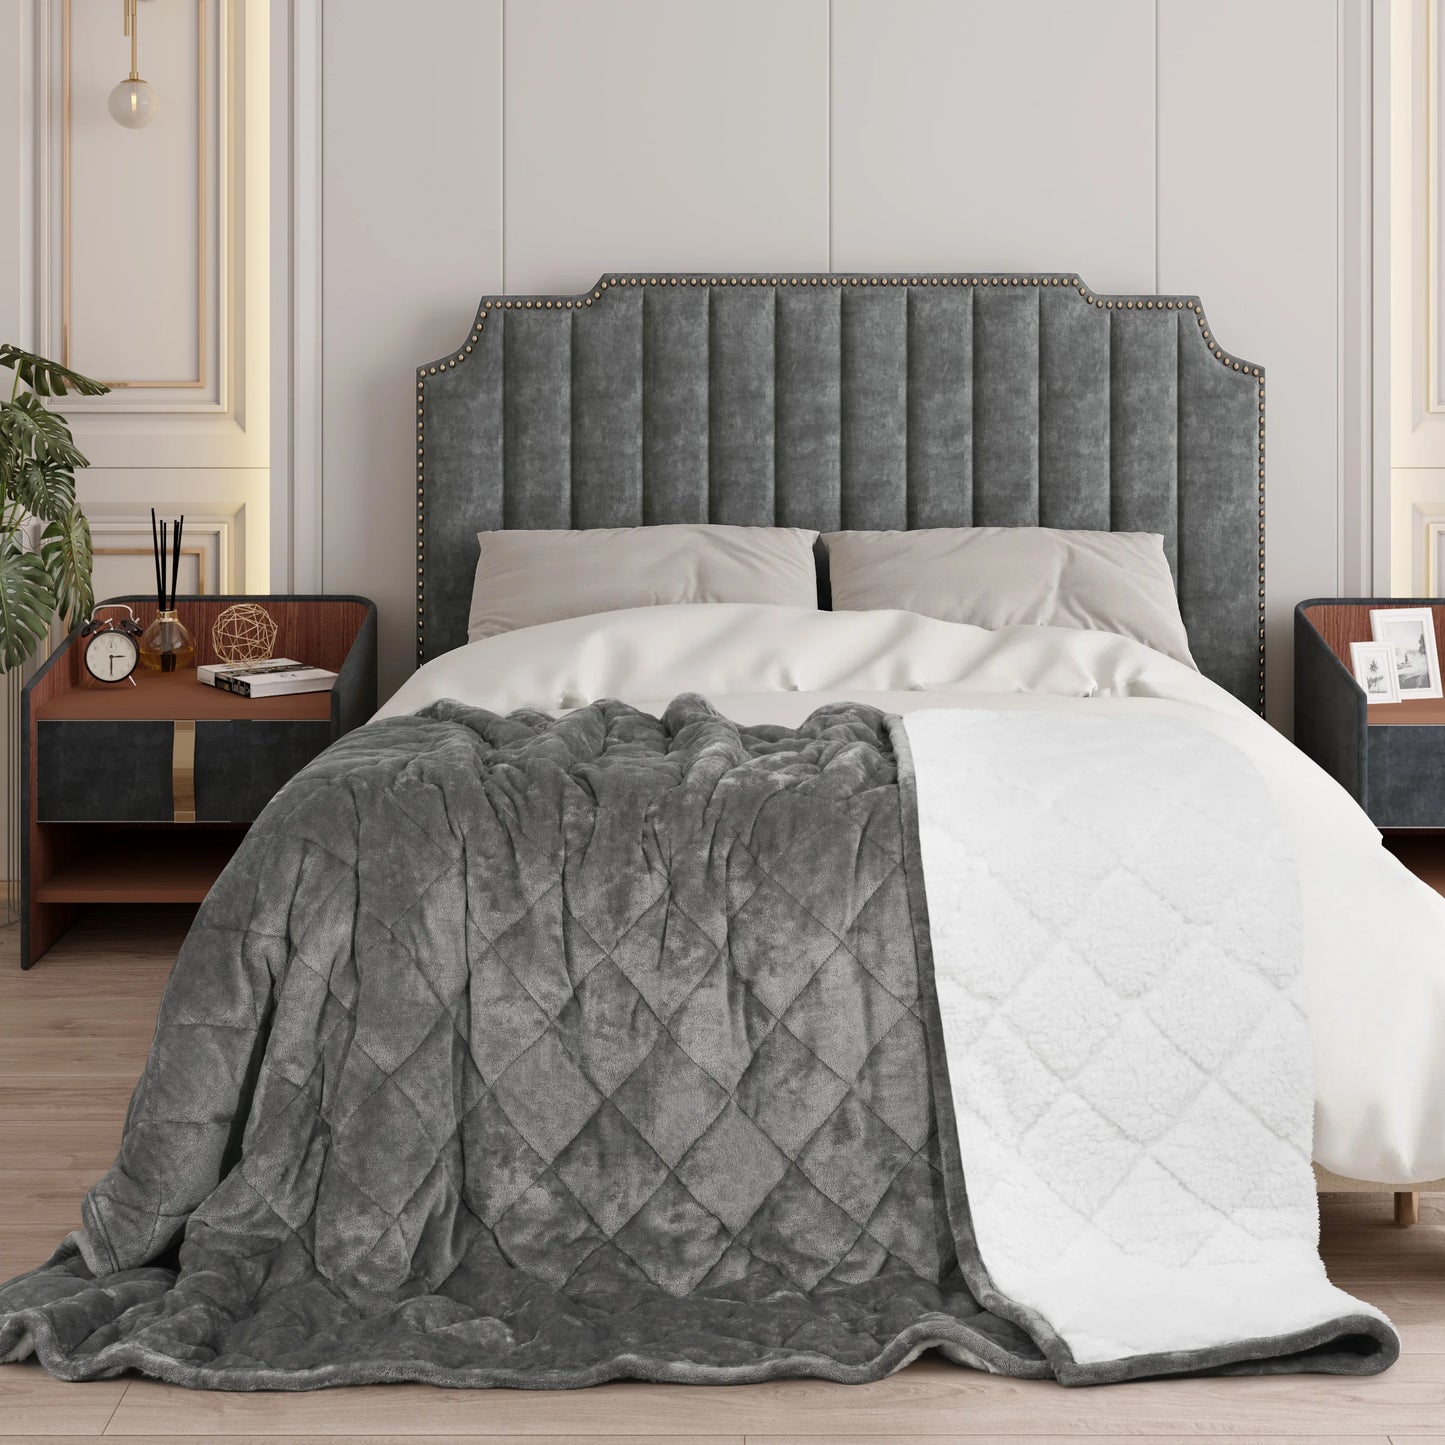 The Therapeutic Weighted Blanket for Stress, Insomnia & Anxiety